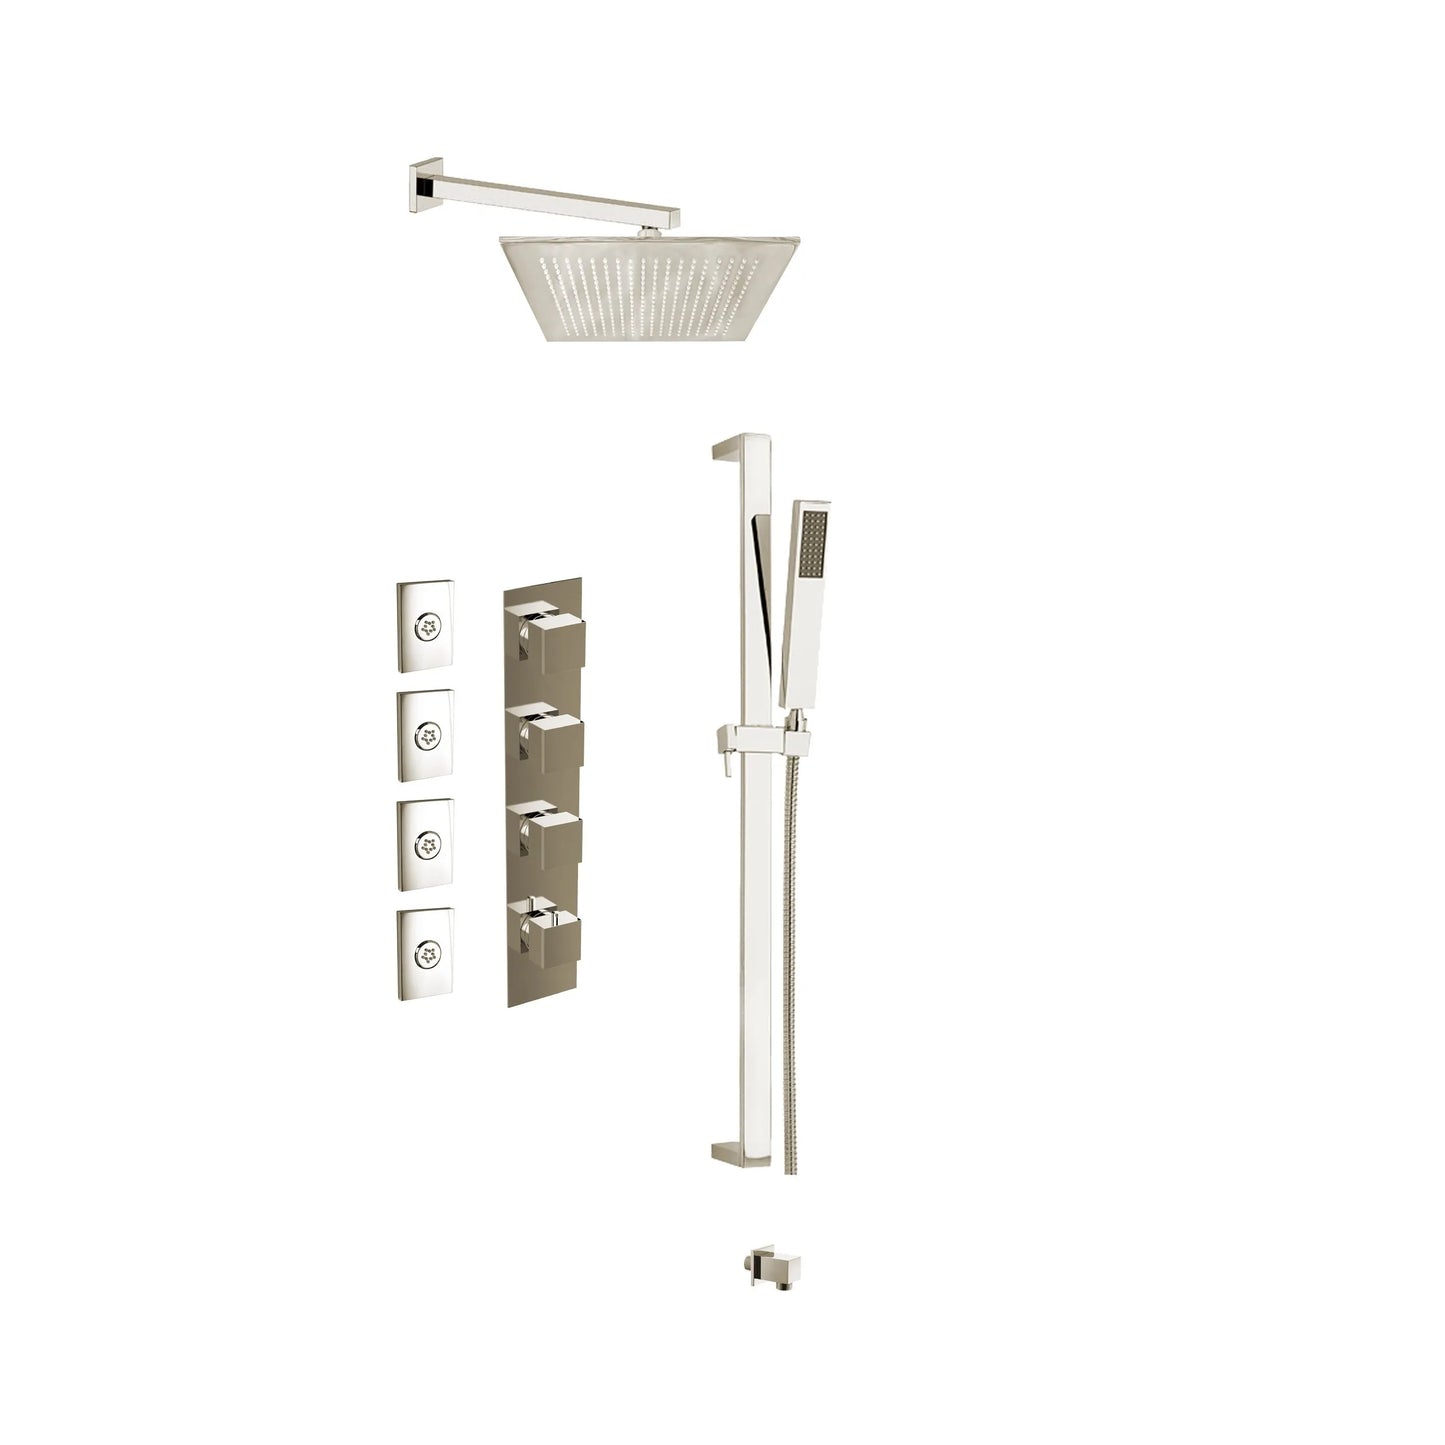 Aquadesign Products Shower Kits (System X19) - Polished Nickel